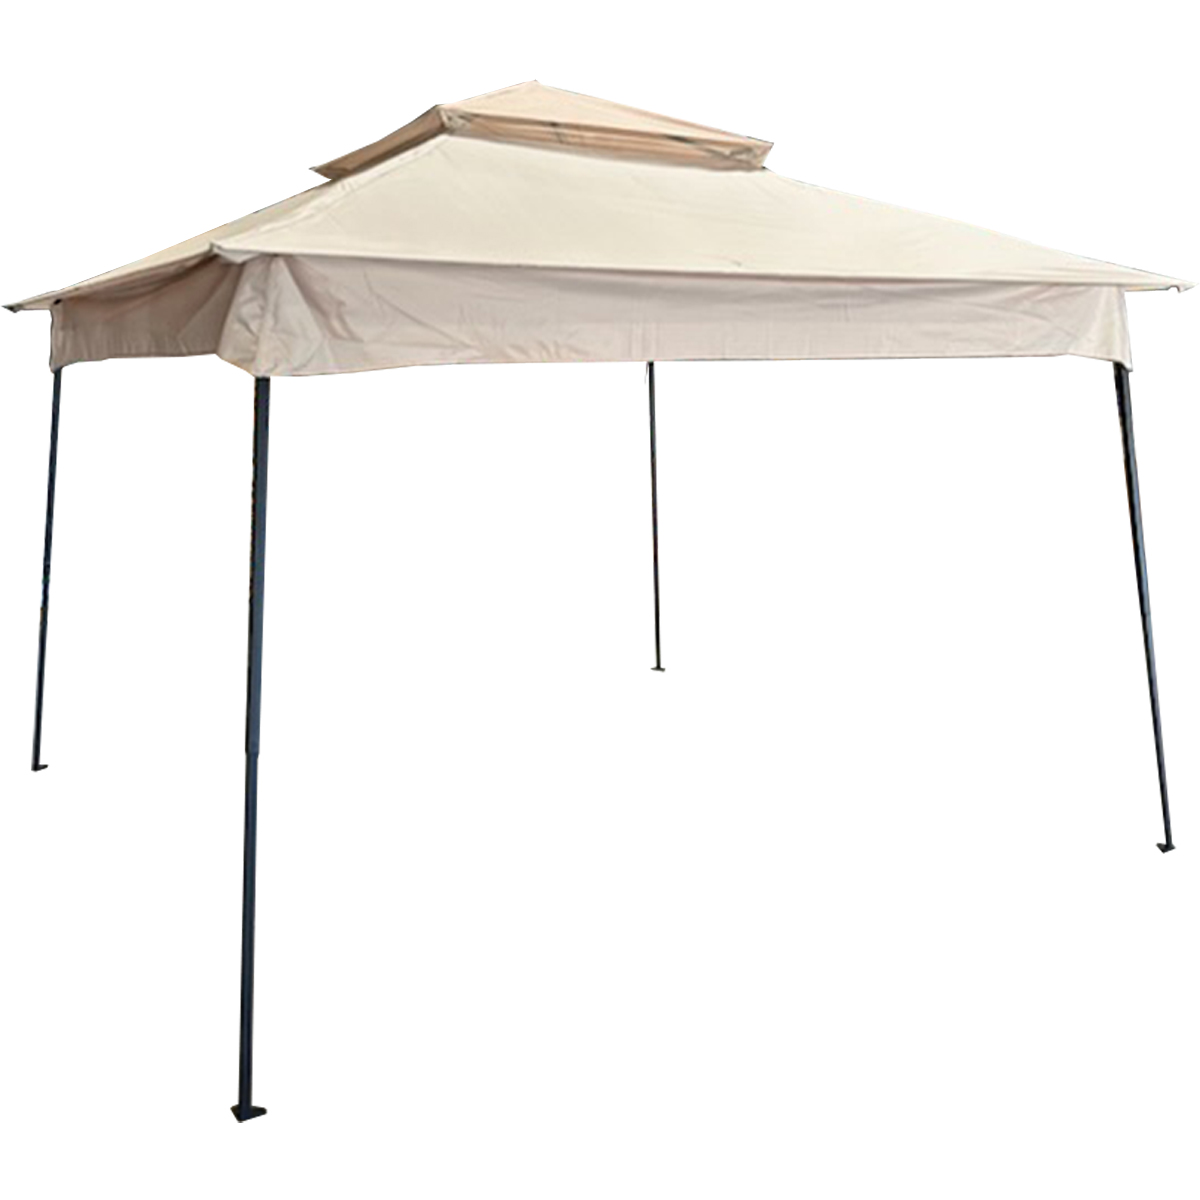 Replacement for Outsunny 11'x 11' Pop Up Gazebo - RipLock 350